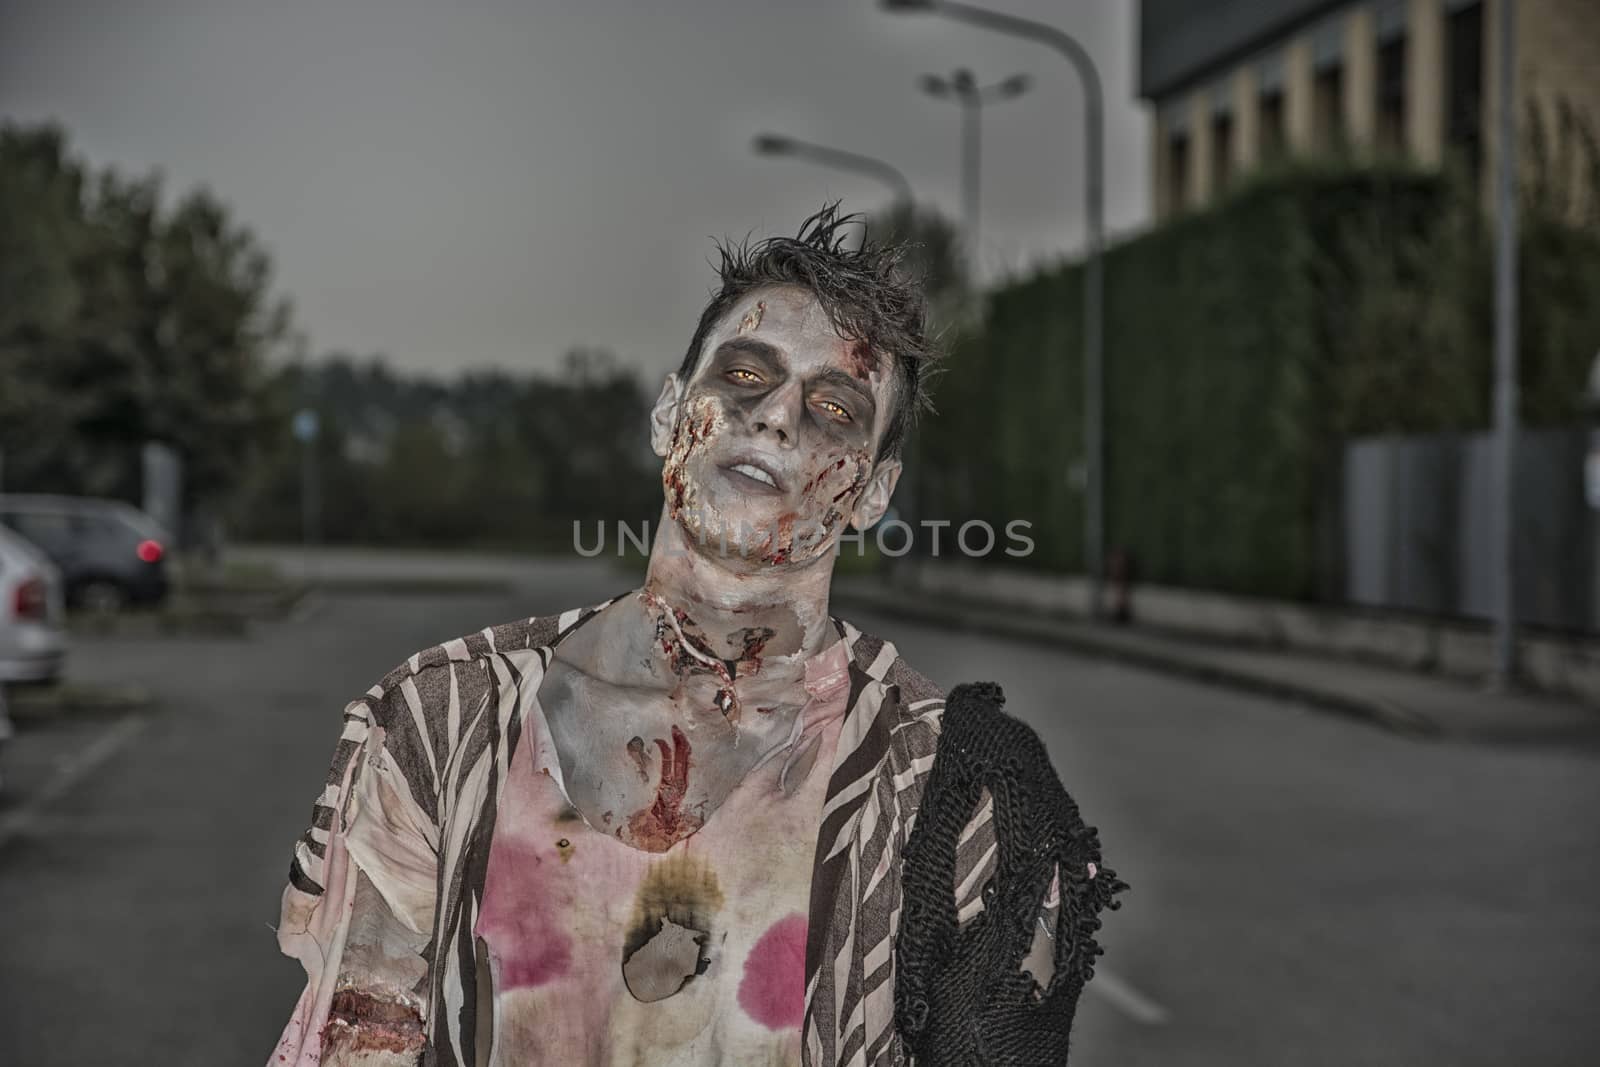 One male zombie standing in empty city street at night looking at camera. Halloween theme